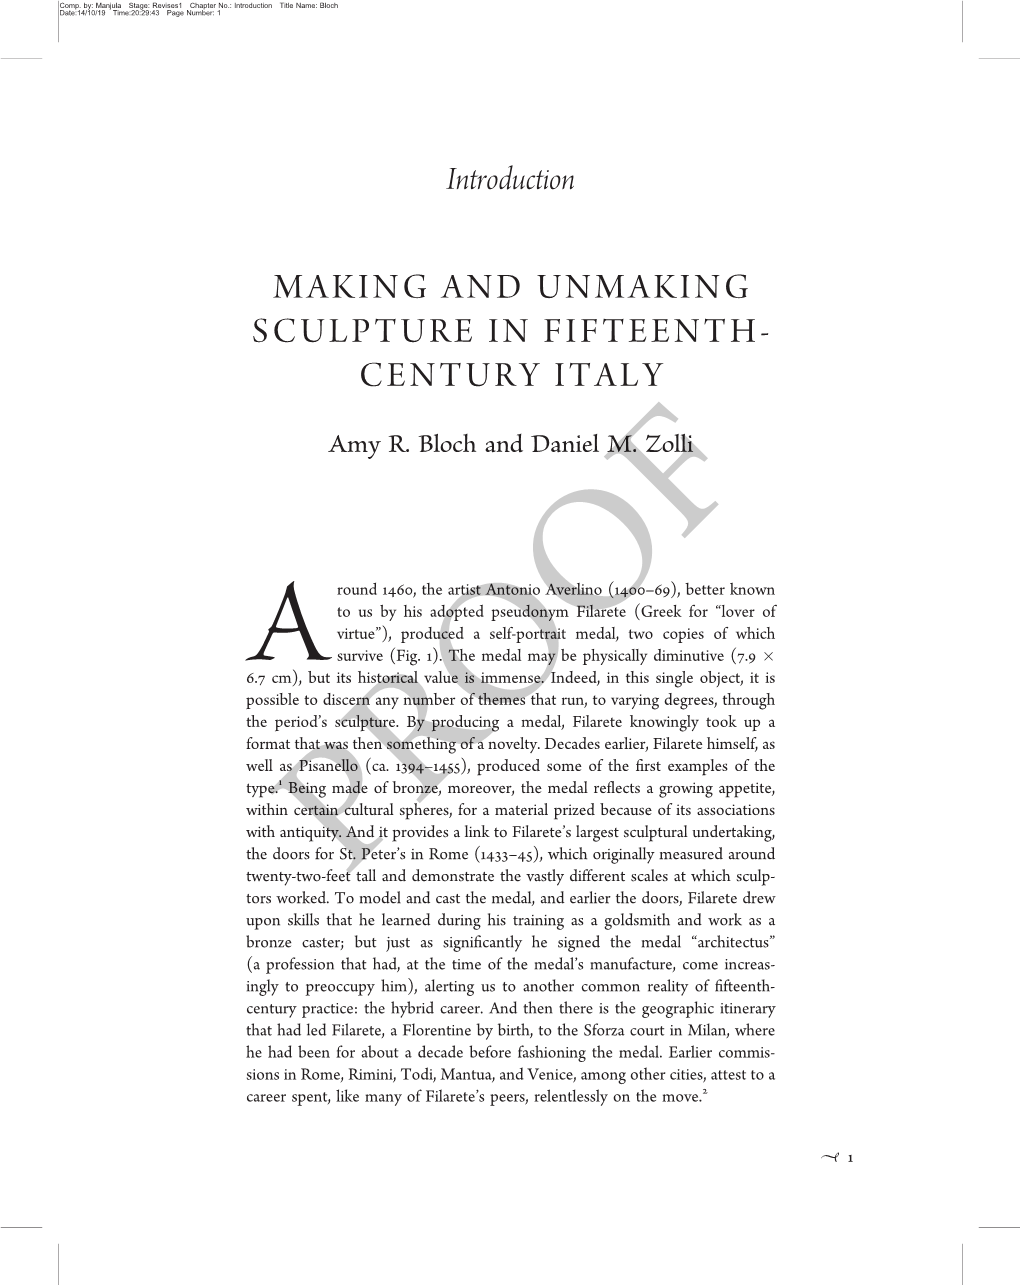 Making and Unmaking Sculpture in Fifteenth- Century Italy